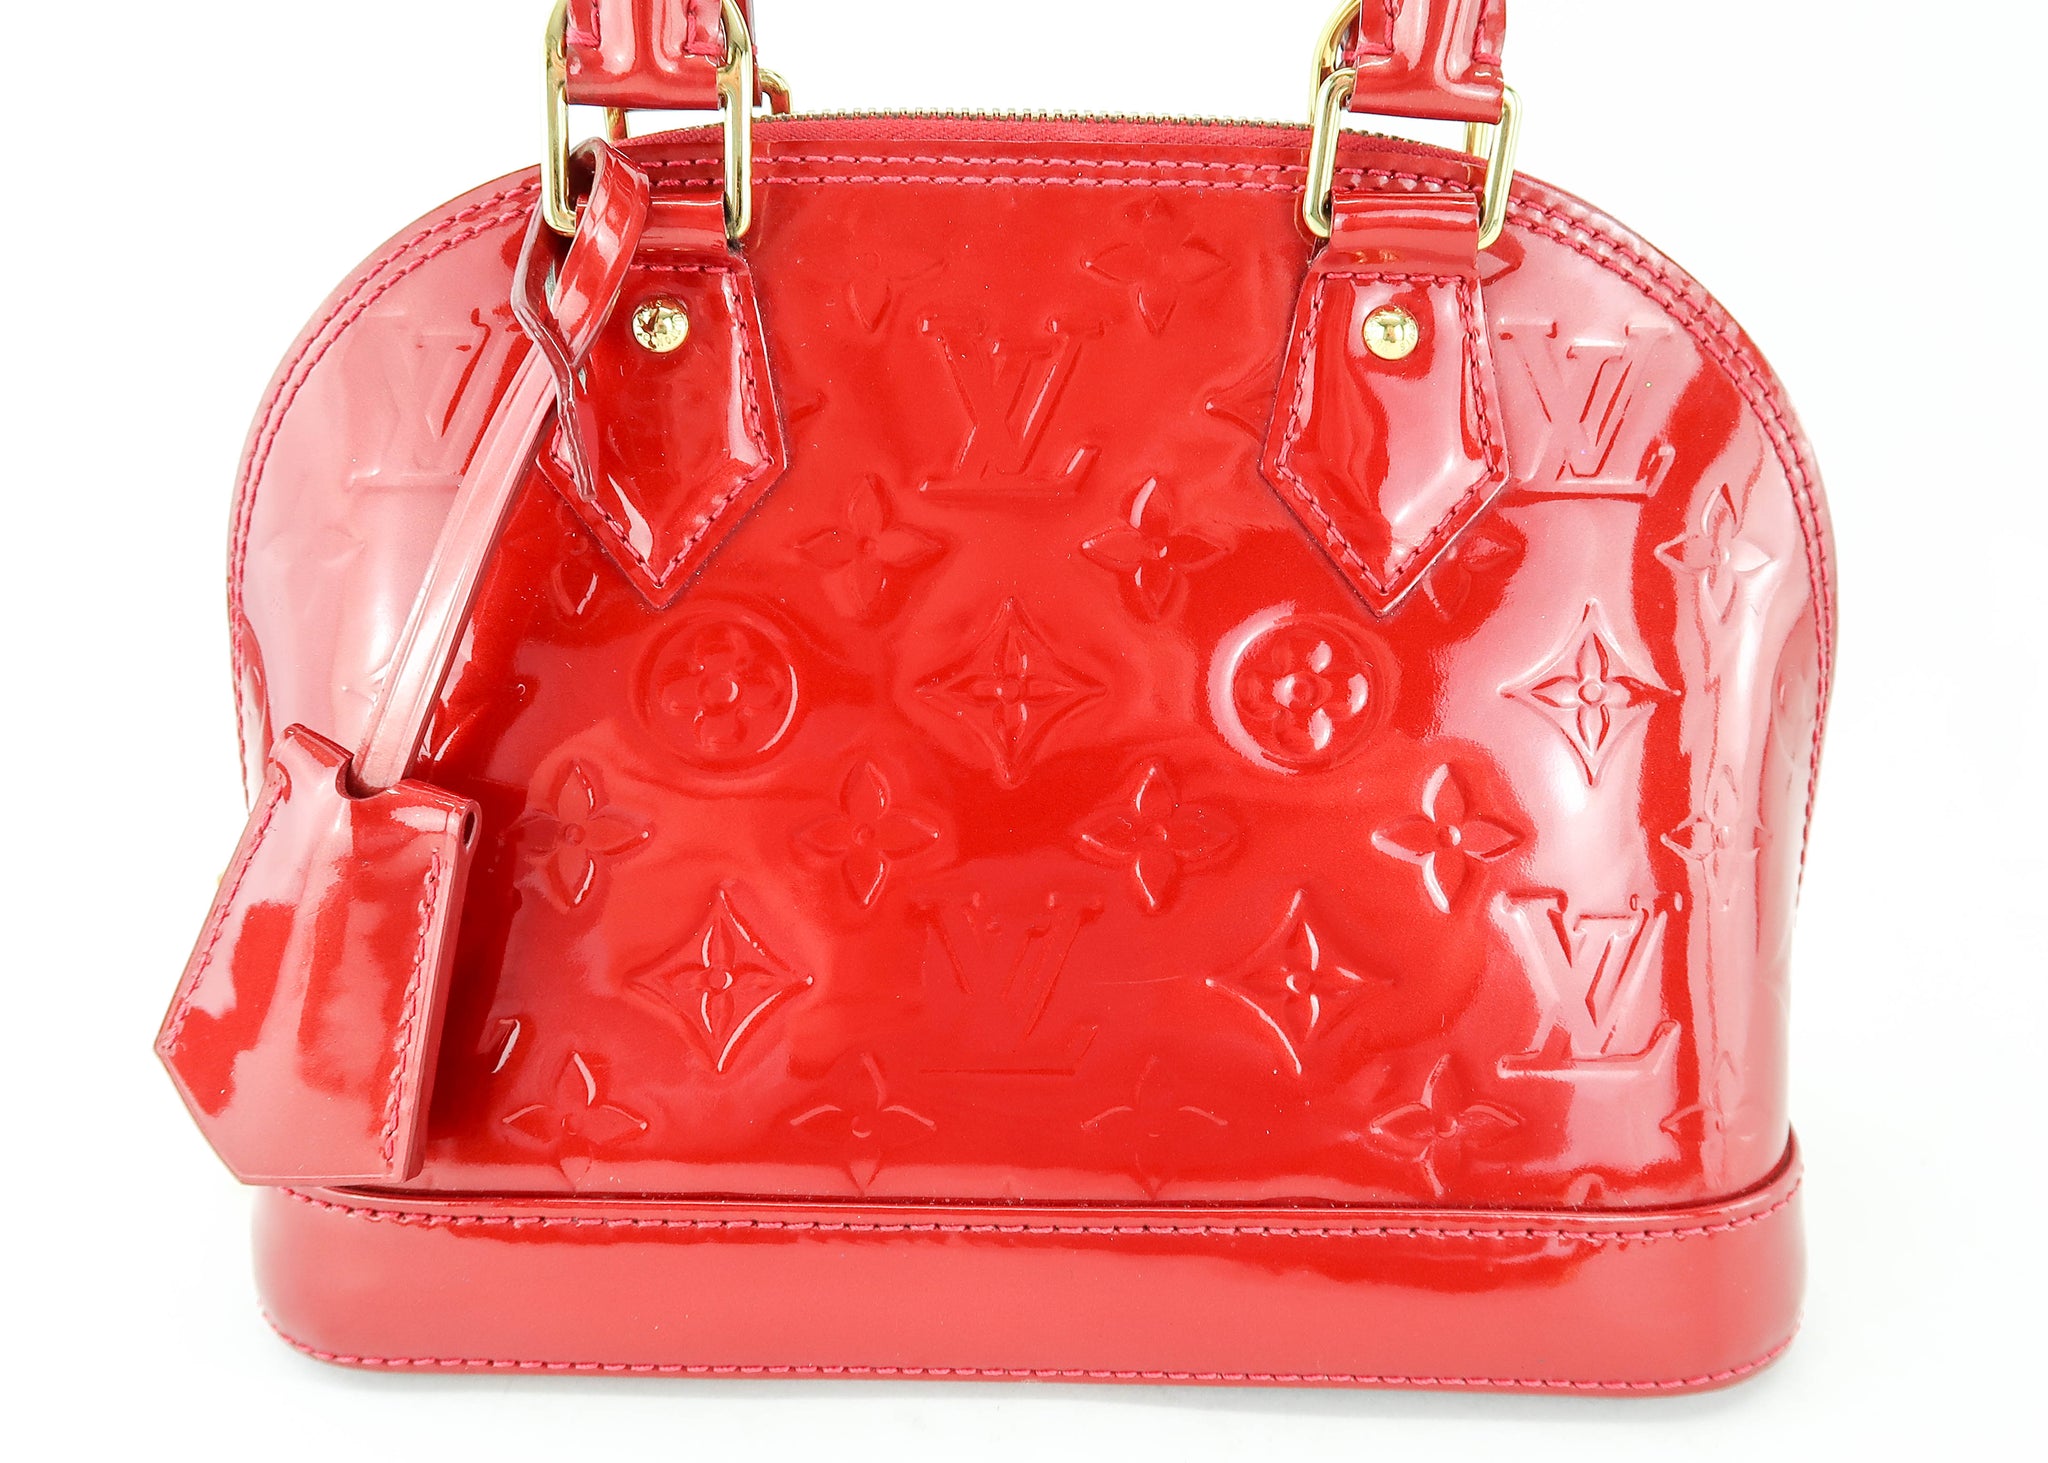 LOUIS VUITTON Red Monogram Vernis Leather Alma BB For Sale at 1stDibs  louis  vuitton red bag, alma bb red vernis, louis vuitton alma bb vernis